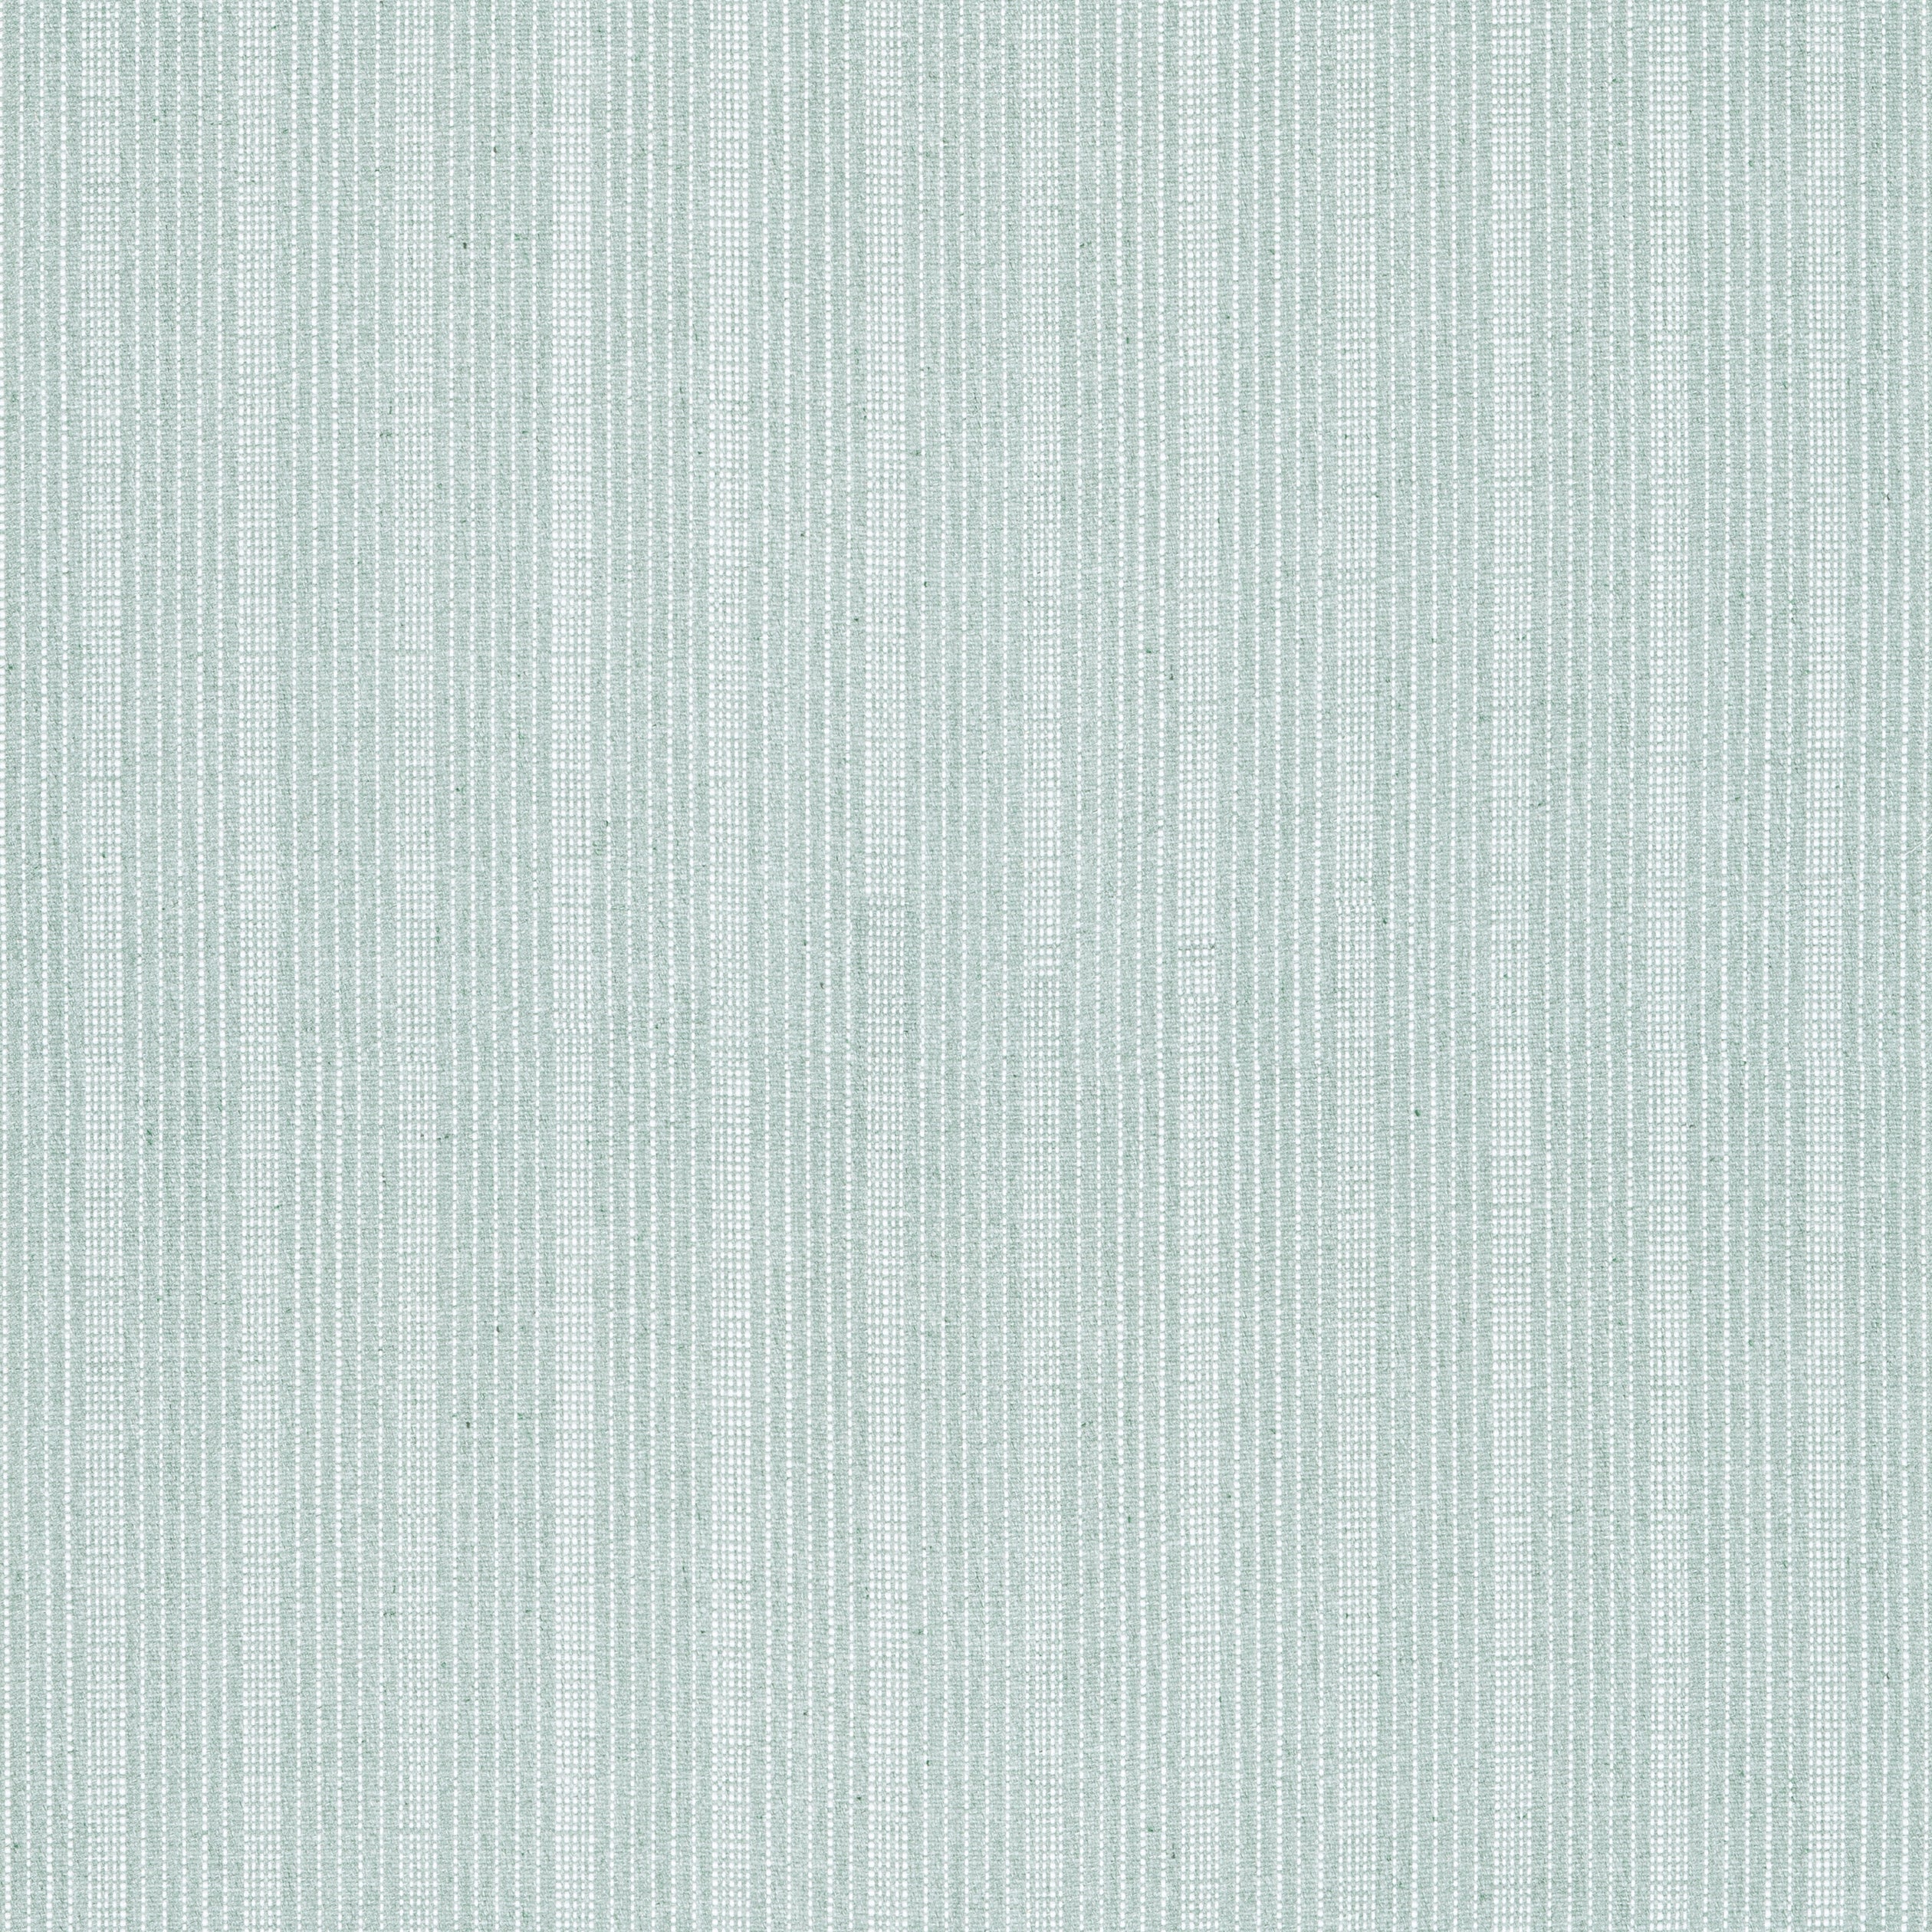 Ebro Stripe fabric in seafoam color - pattern number W8508 - by Thibaut in the Villa collection